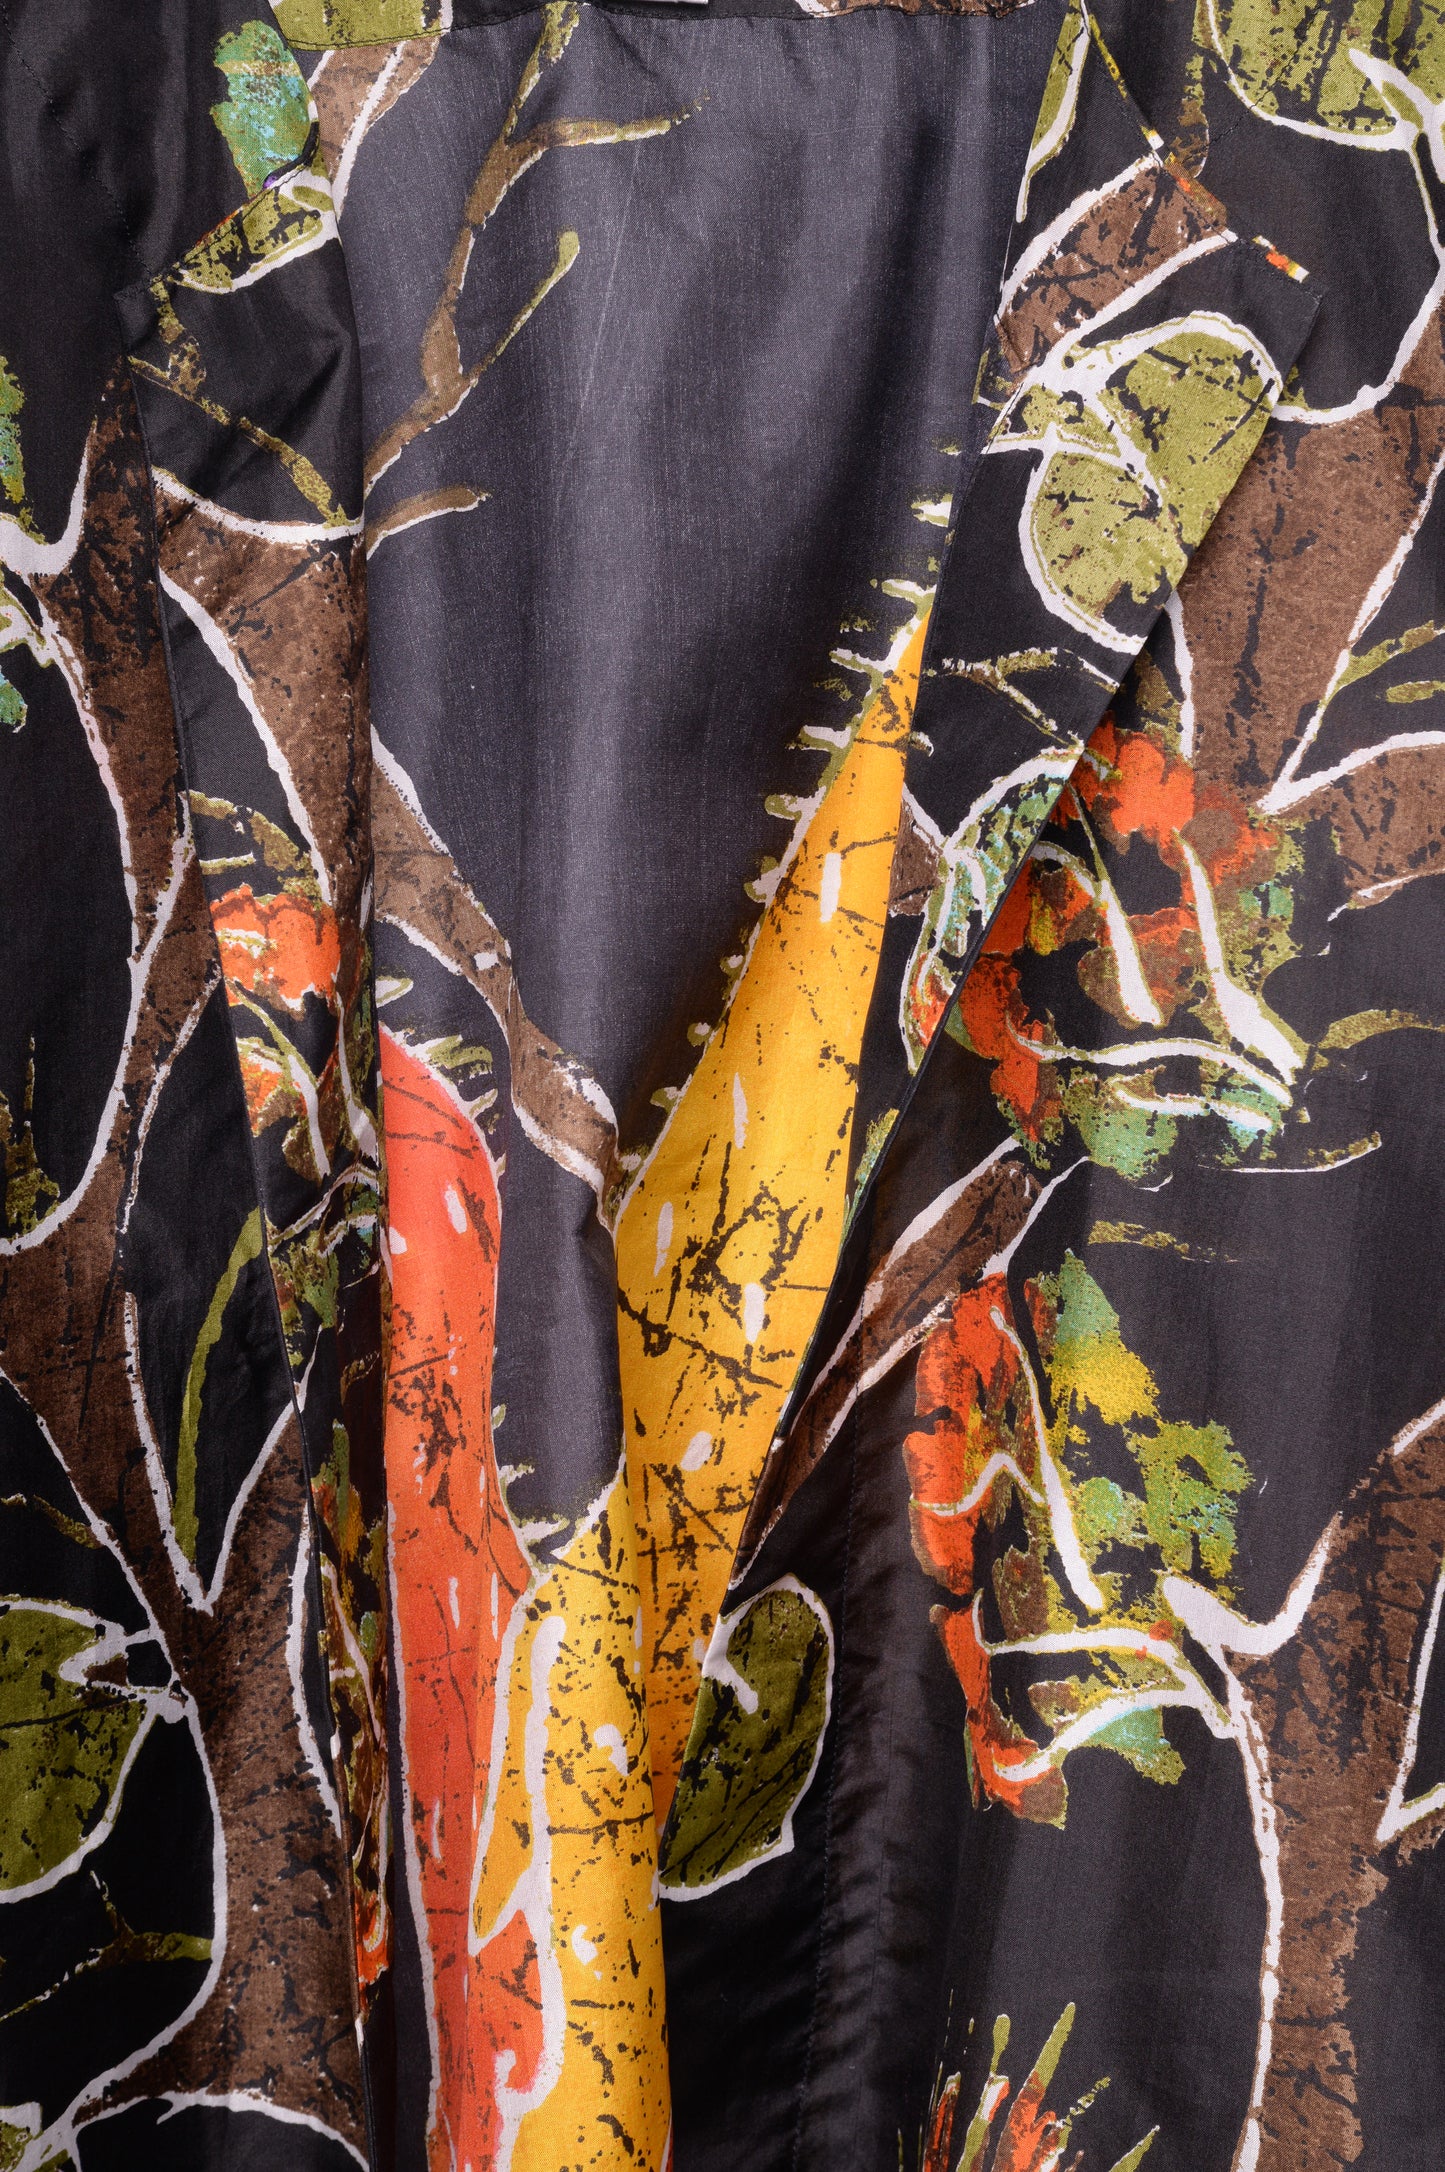 Abstract Floral Silk Robe